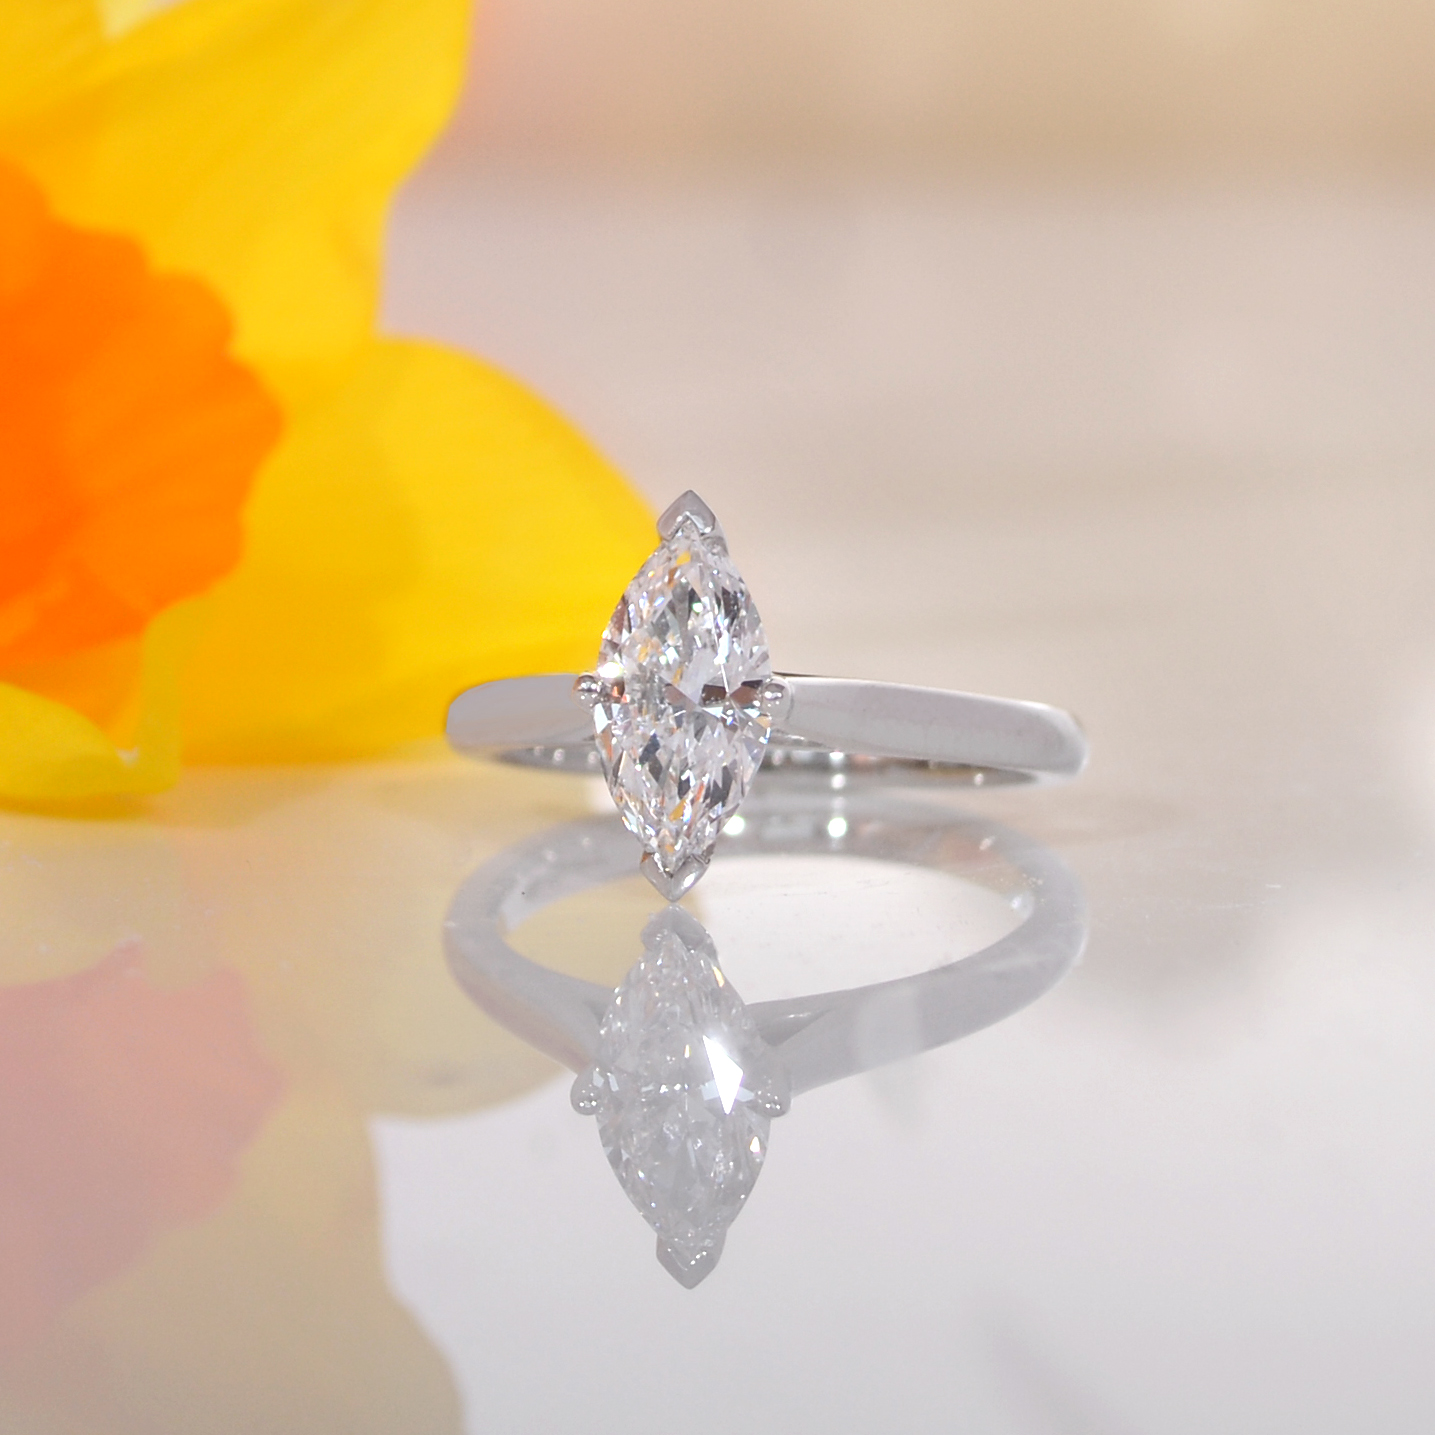 The Marquise diamond ring from Laings